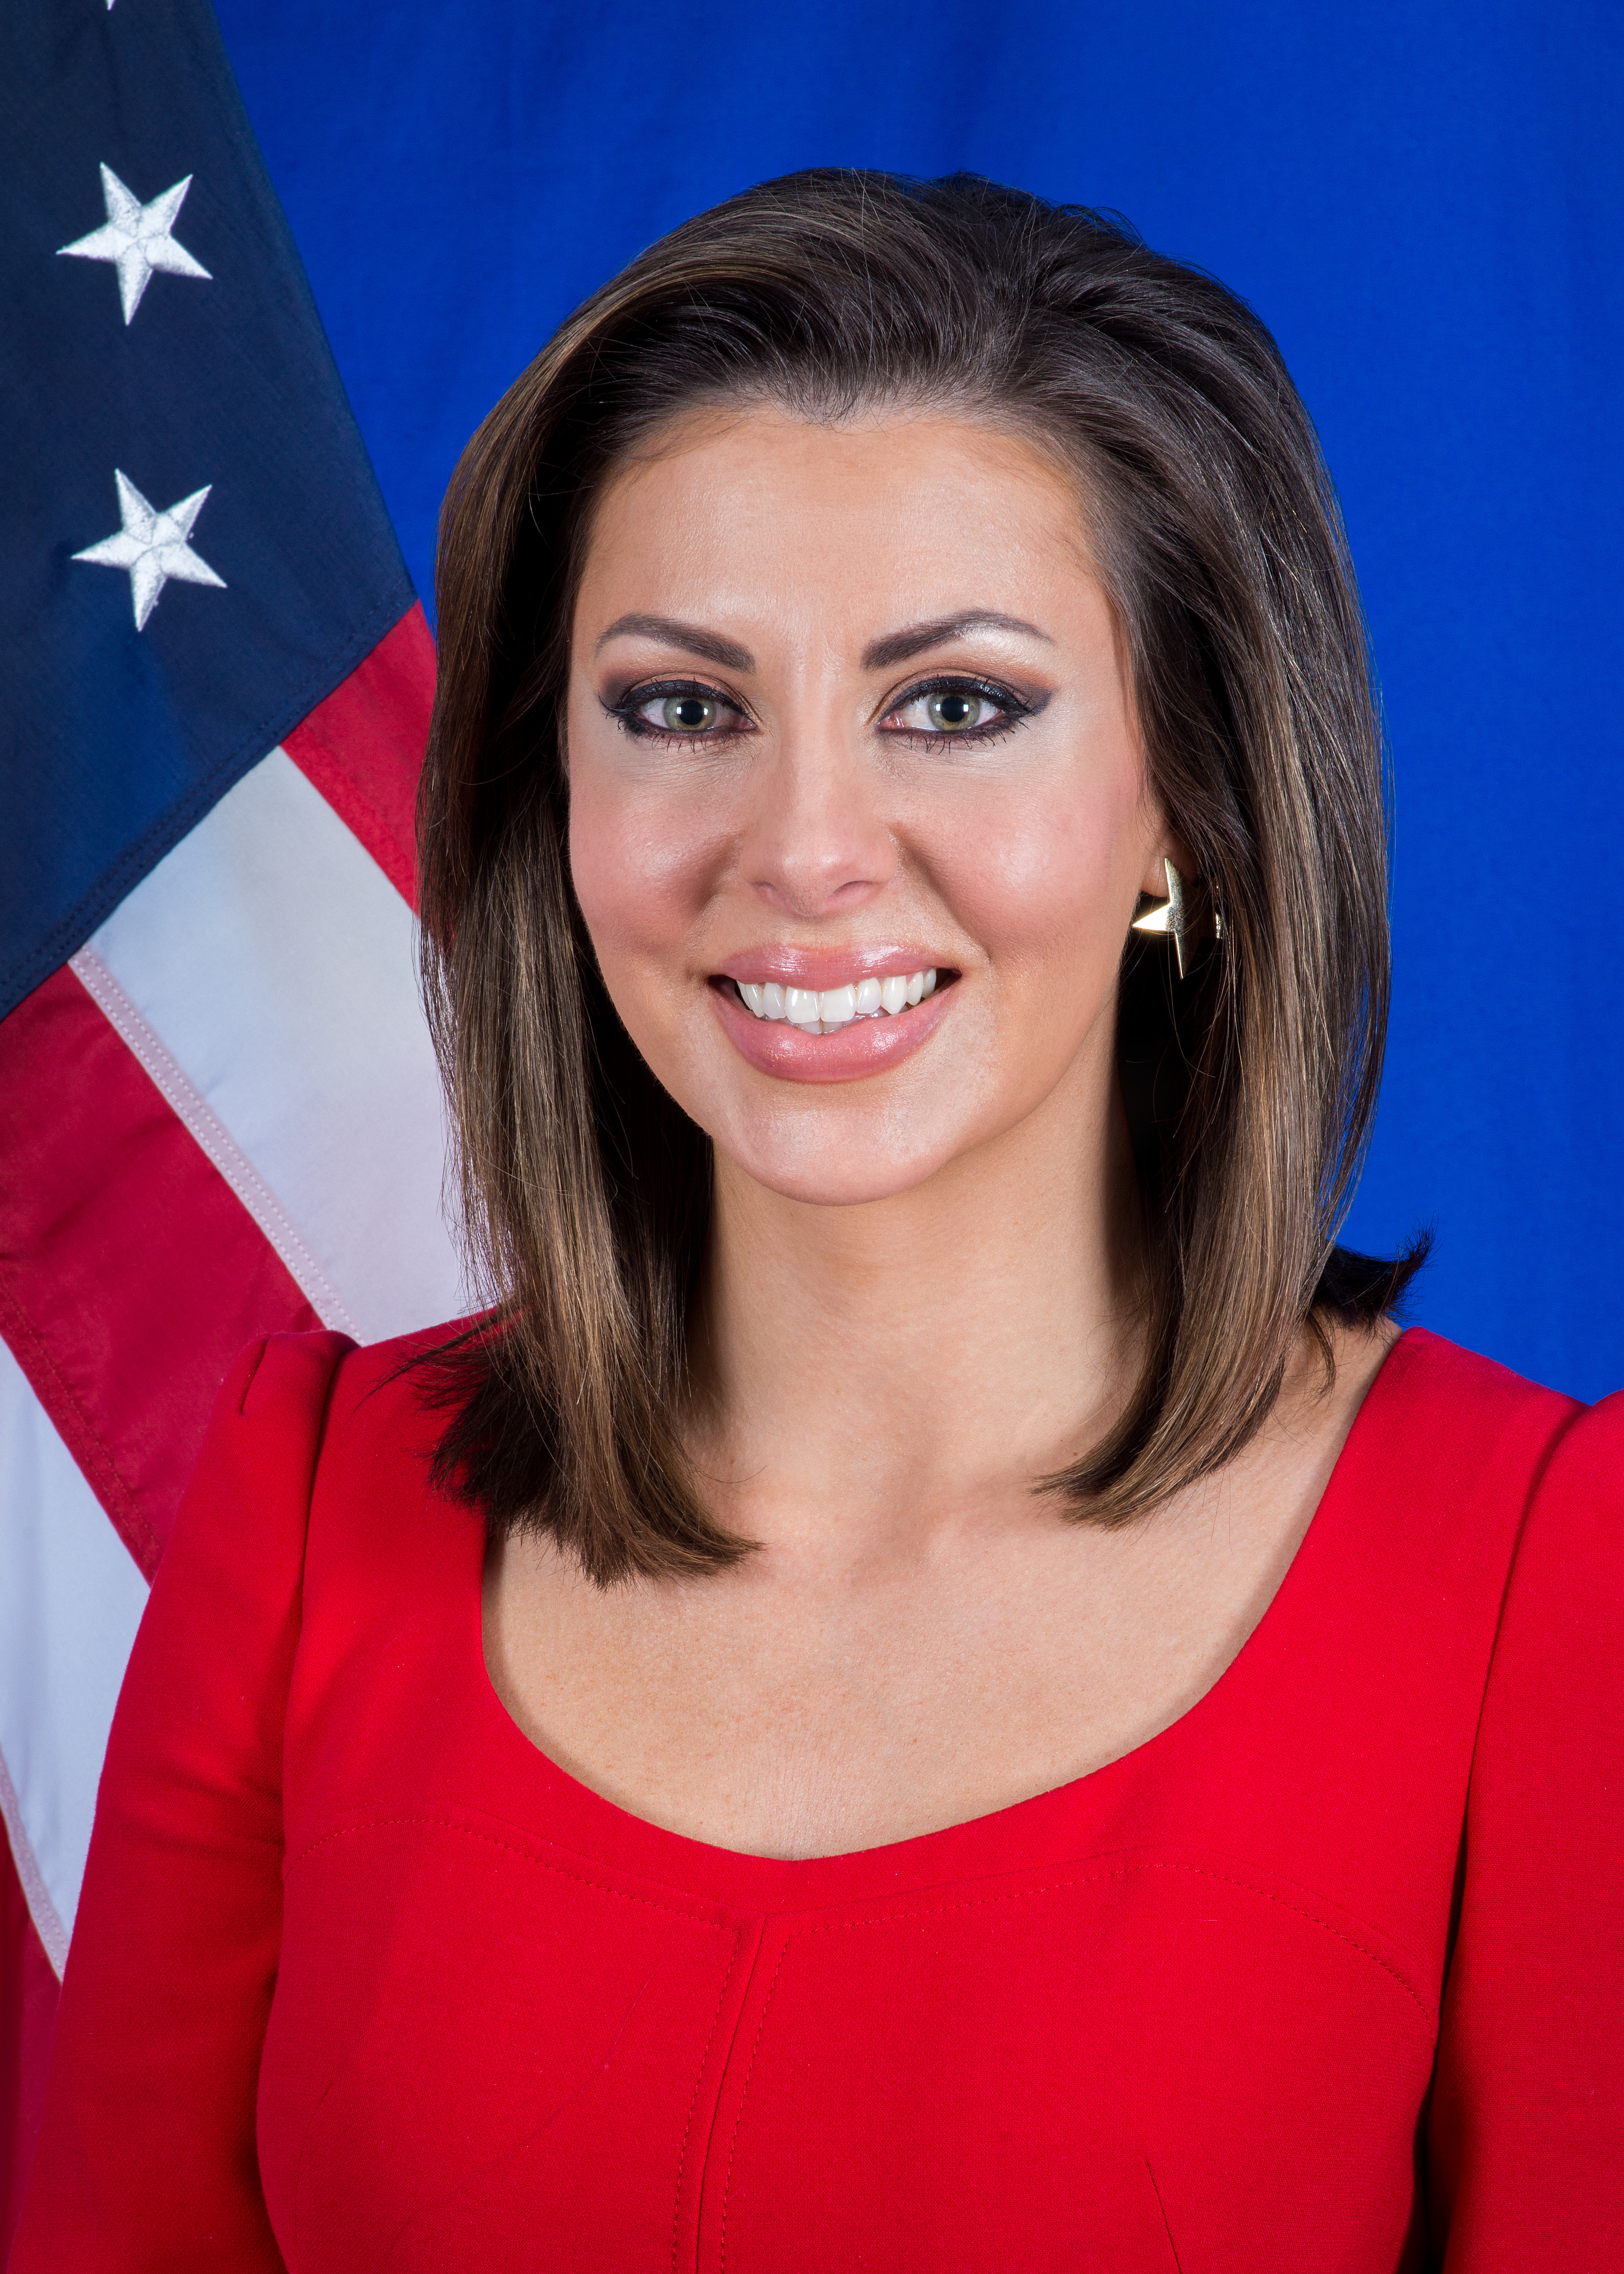 Morgan Ortagus was sworn in as U.S. State Department Spokesperson on April 3, 2019. Ms. Ortagus, a seasoned foreign policy professional and an active U.S. Naval Reserve Officer, has worked her entire career in financial services, consulting, and diplomacy.